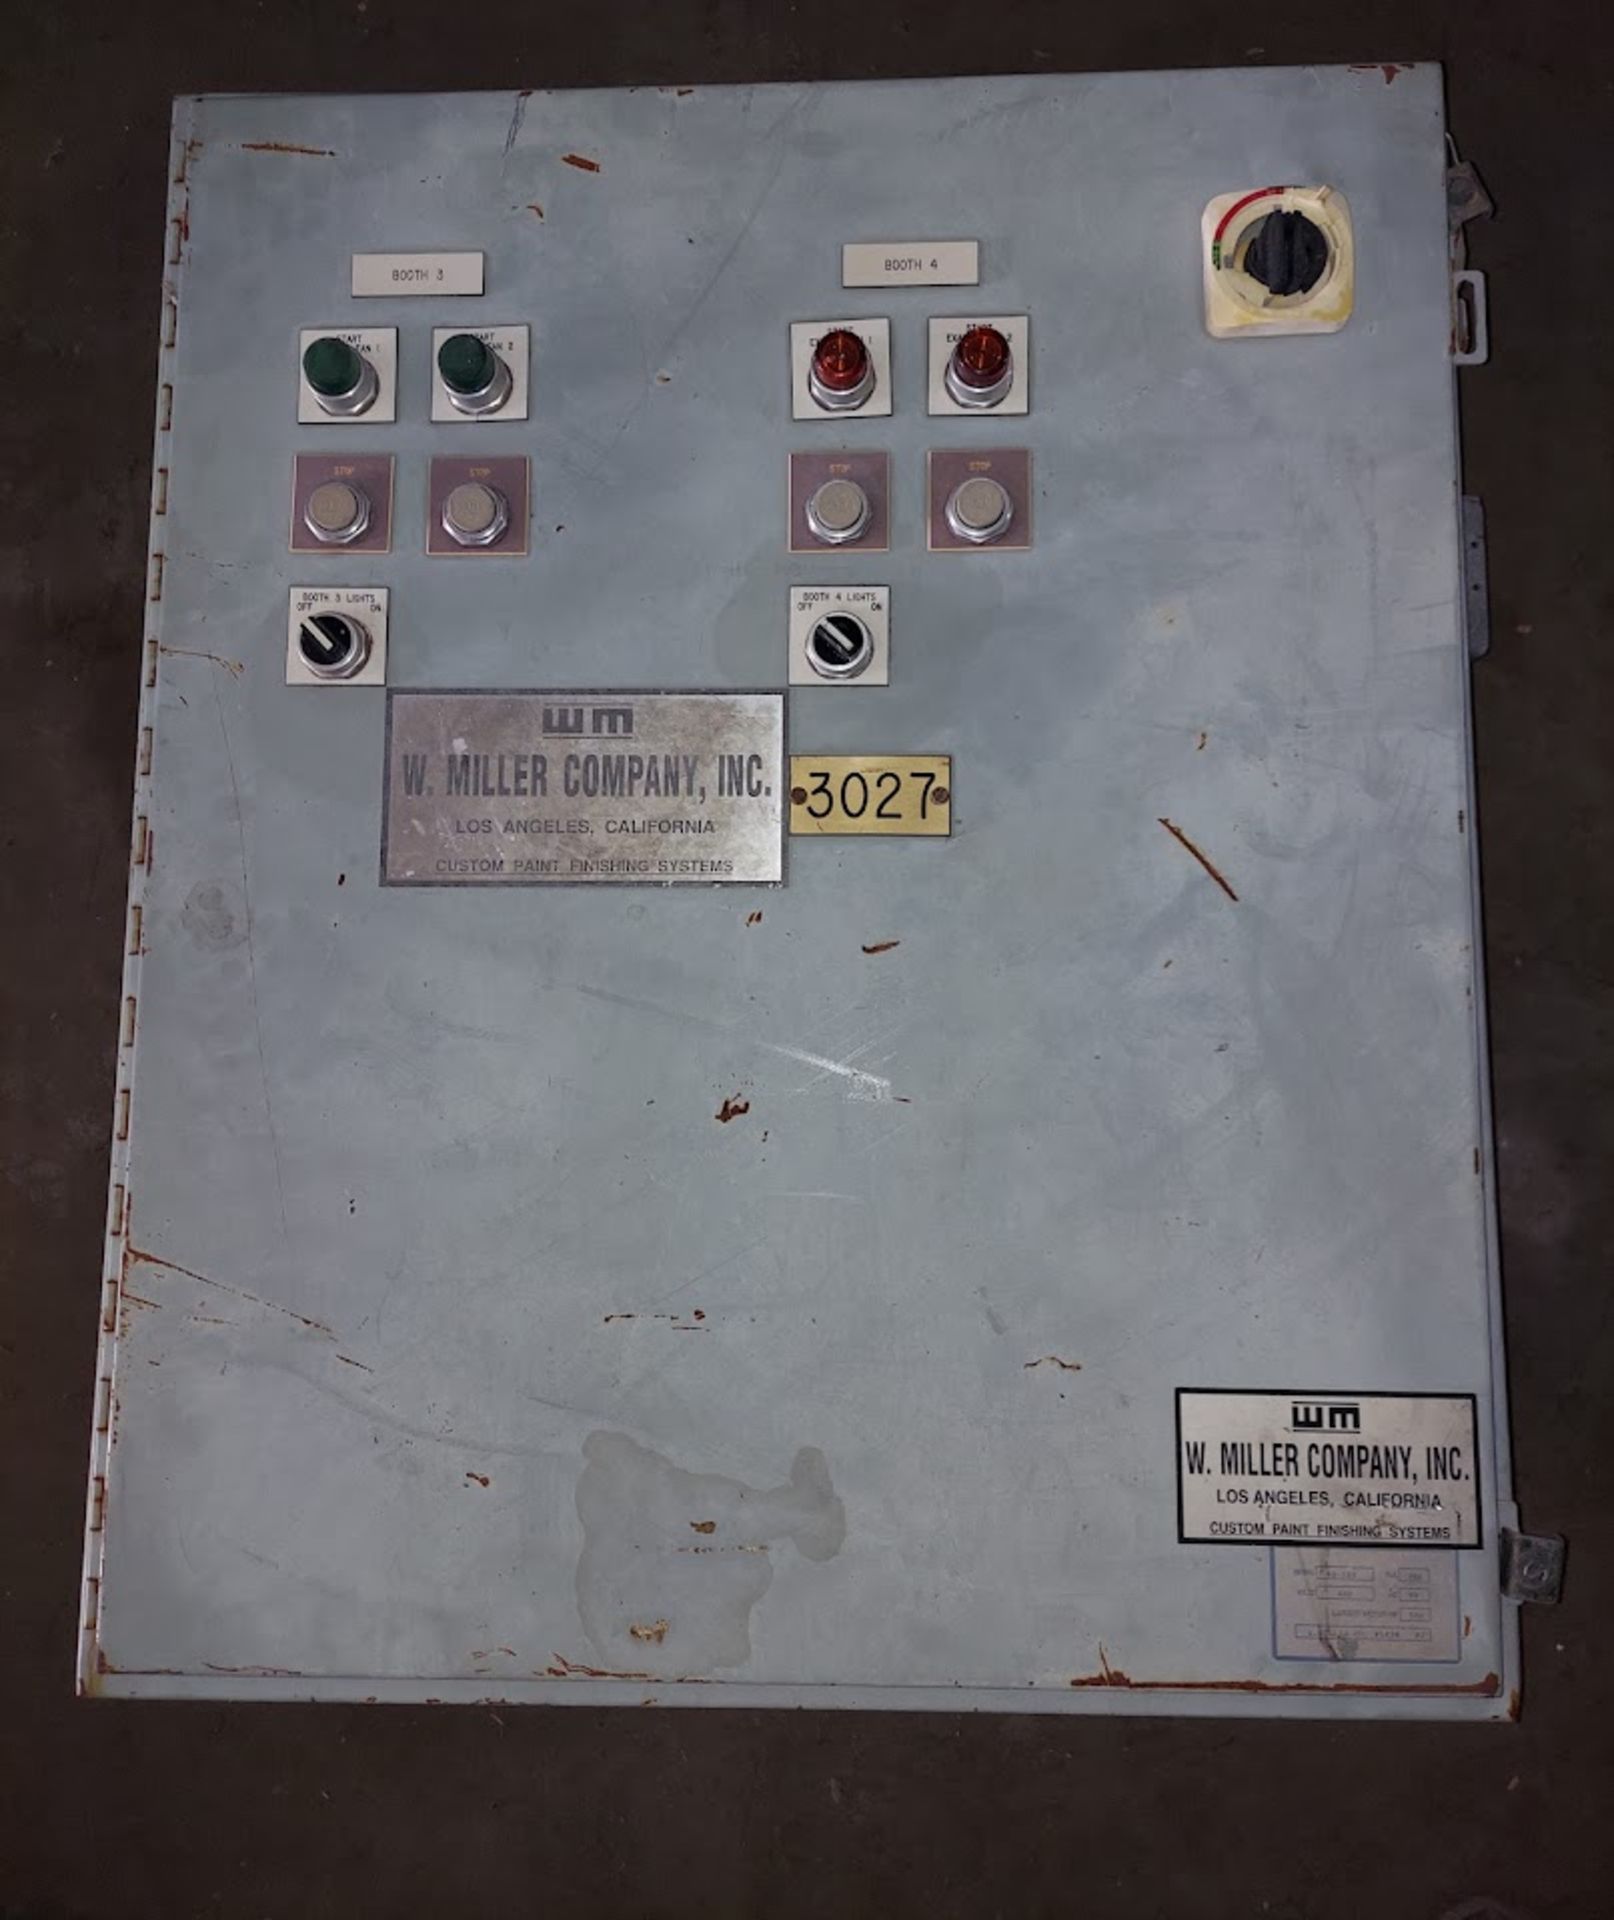 W. Miller Company Inc. Custom Painting Finishing System Electric Control Panel